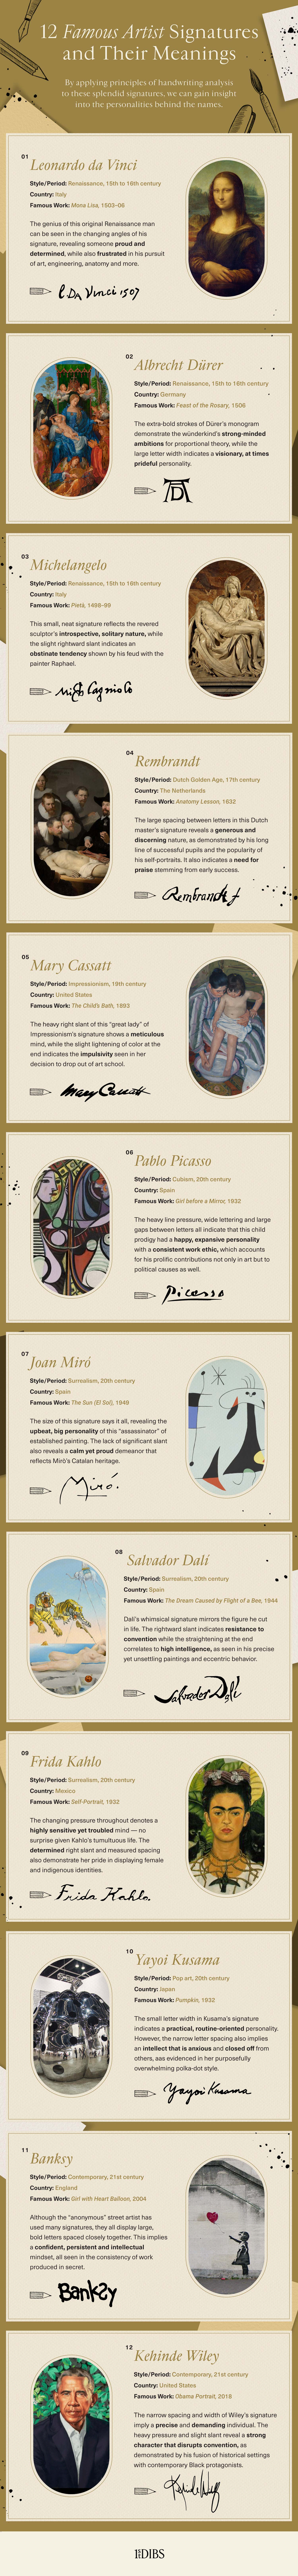 12 Famous Artist Signatures and Their Meanings